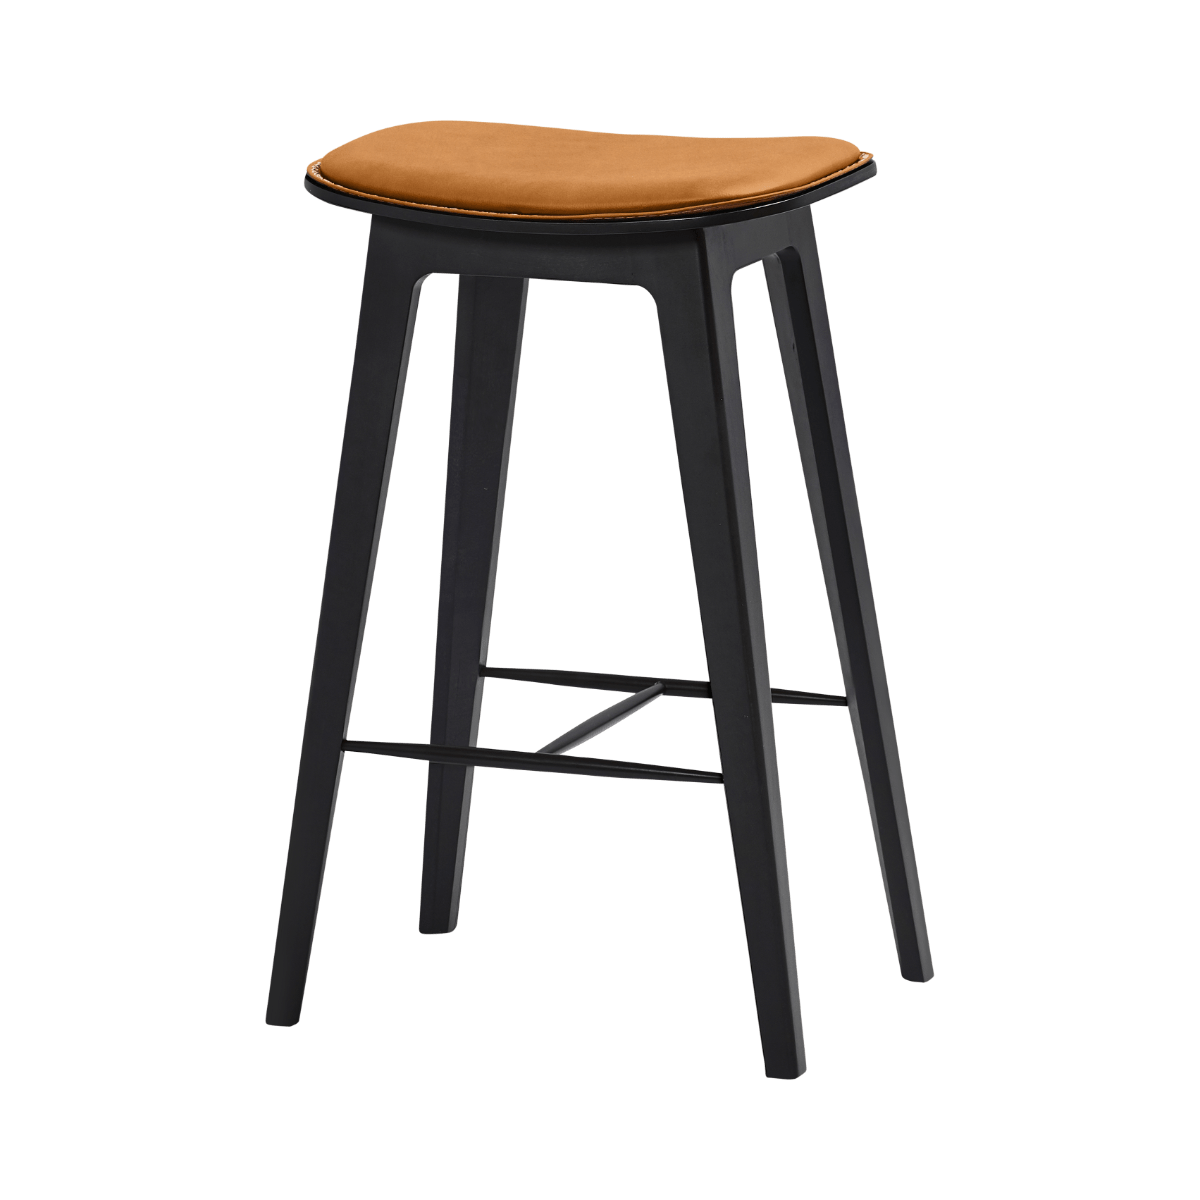 variant_8594308% | Nordic Bar Stool - Beech with stitches [Contract] - 68 cm Luna Sandstone | SACKit